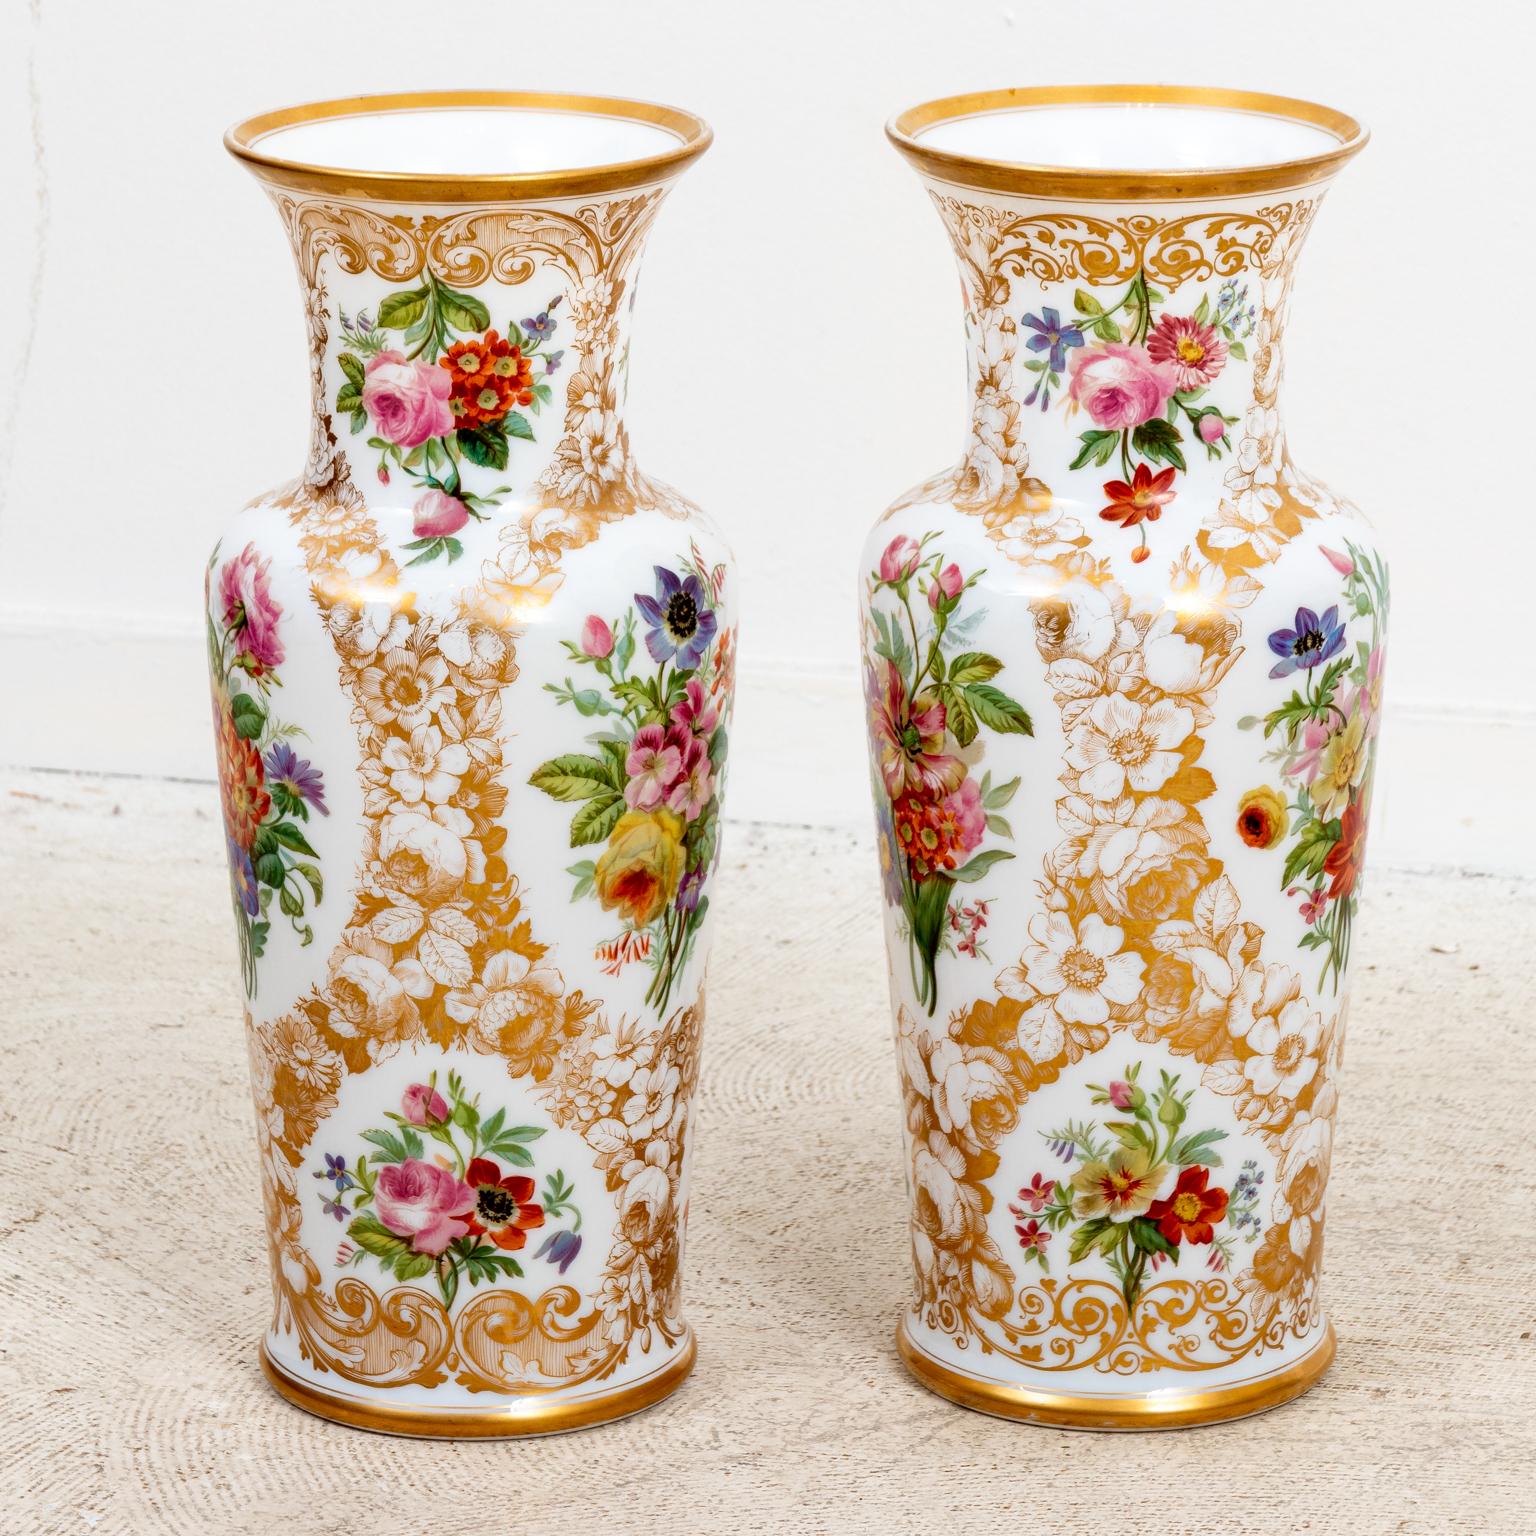 Circa 1825-1850s pair of white opaline Baccarat glass floral painted vases painted by Jean Francois Robert. Label on bottom. Purchased in early 1960s for $2000. Made in France. Please note of wear consistent with age. Gold leaf in excellent